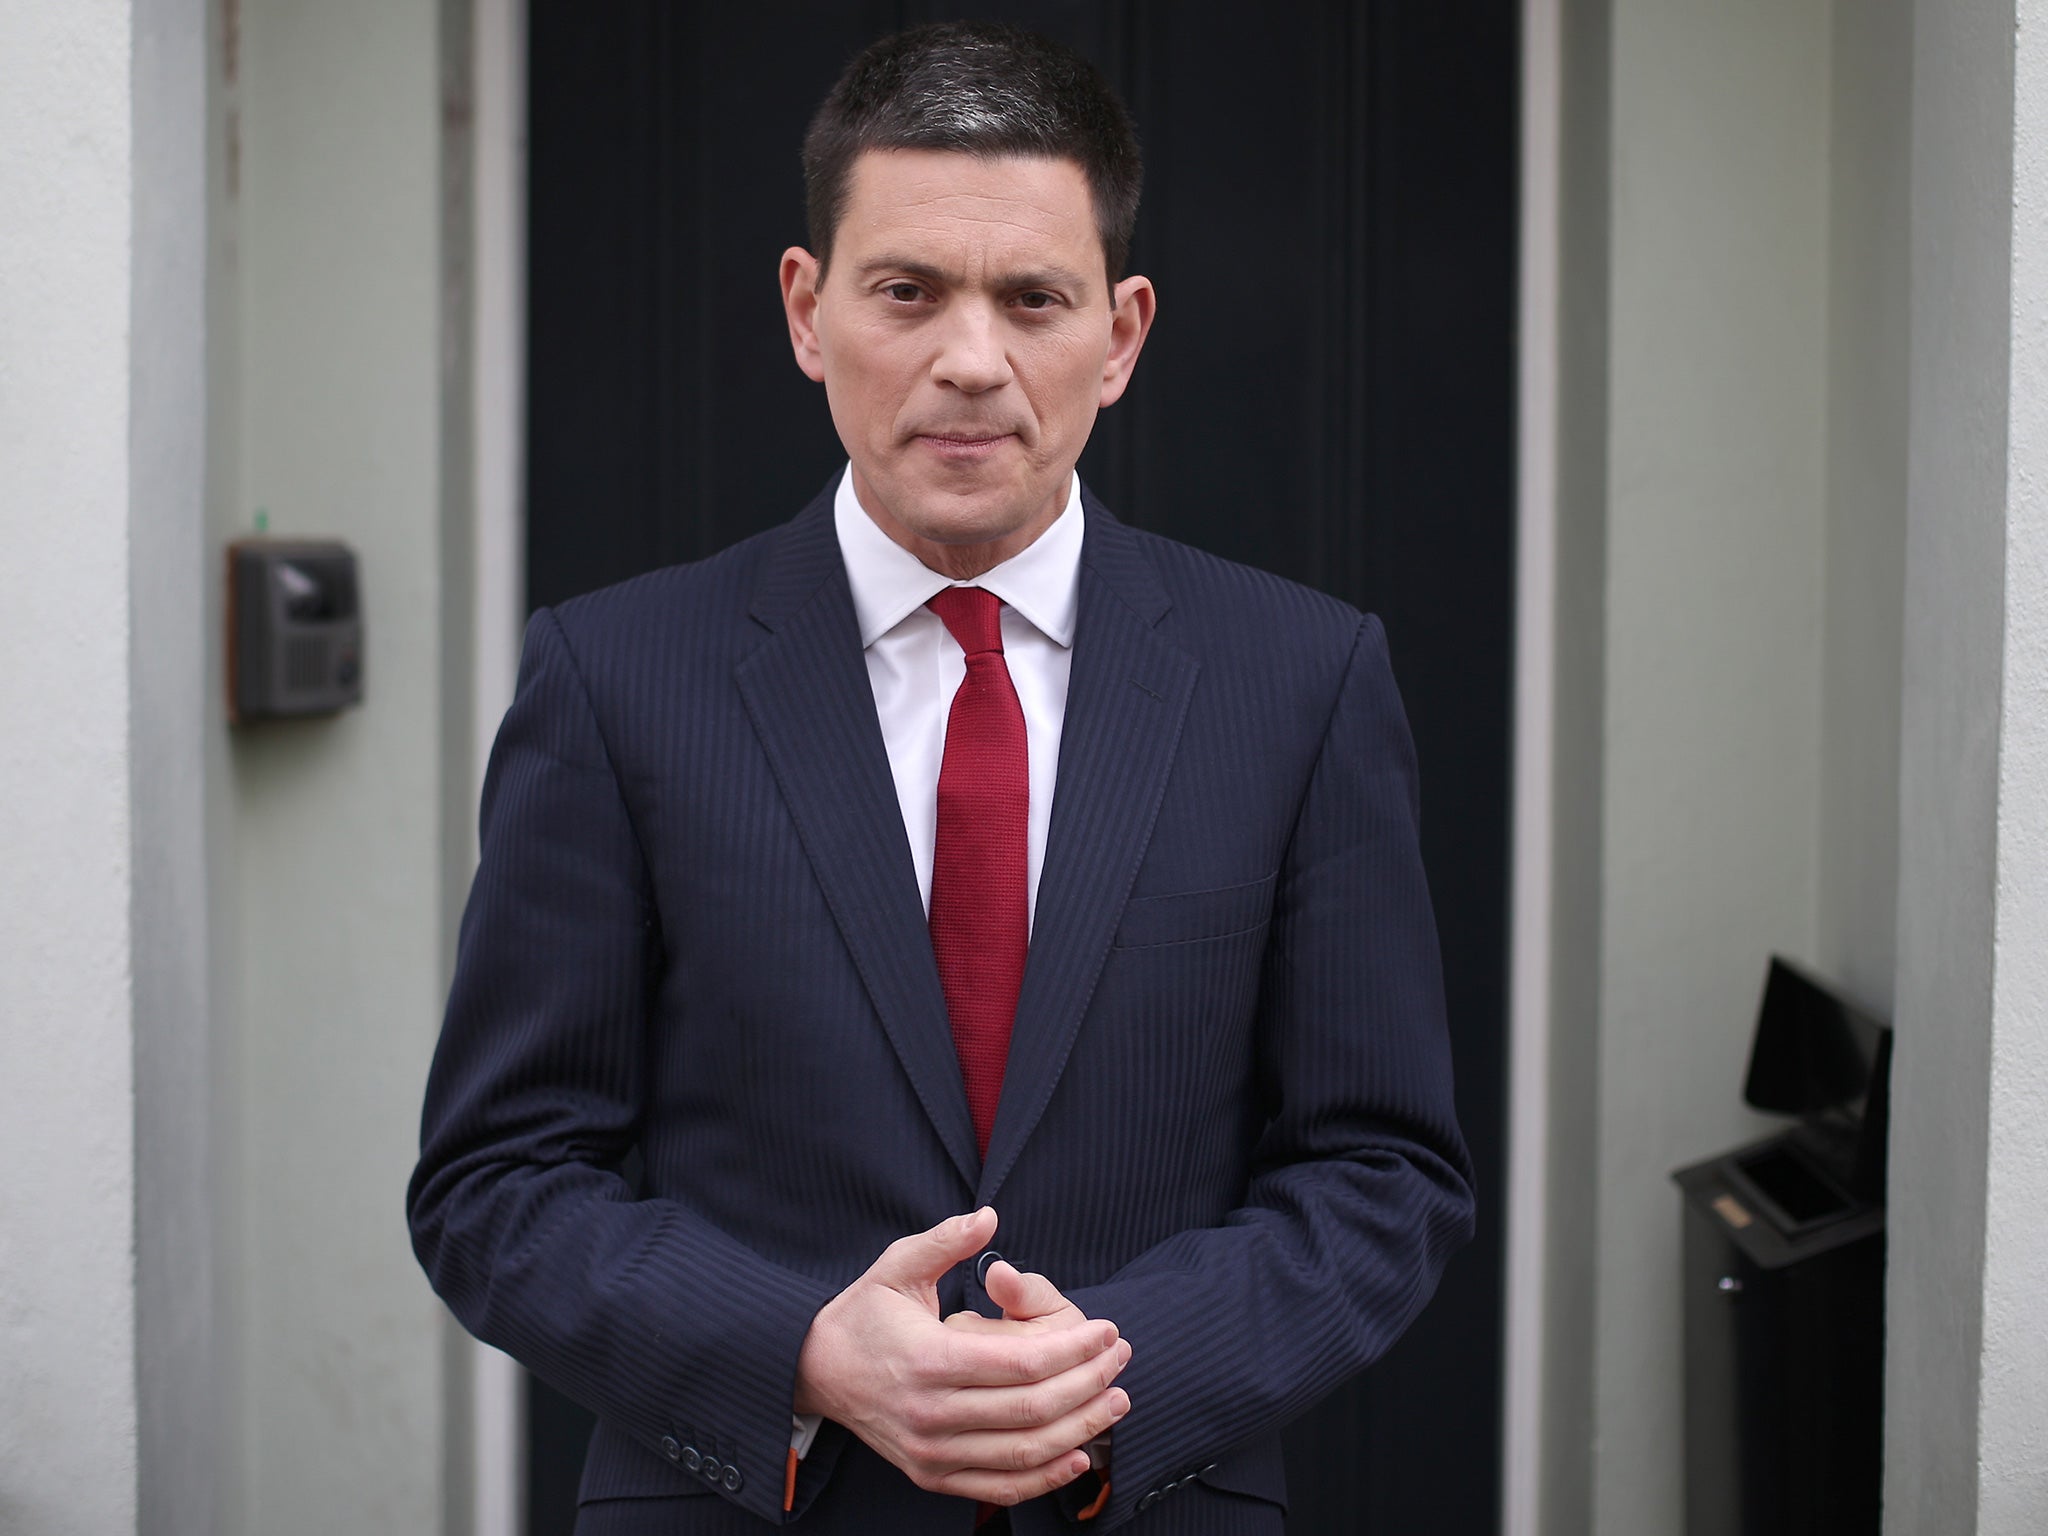 David Miliband entered into the debate on Labour's future